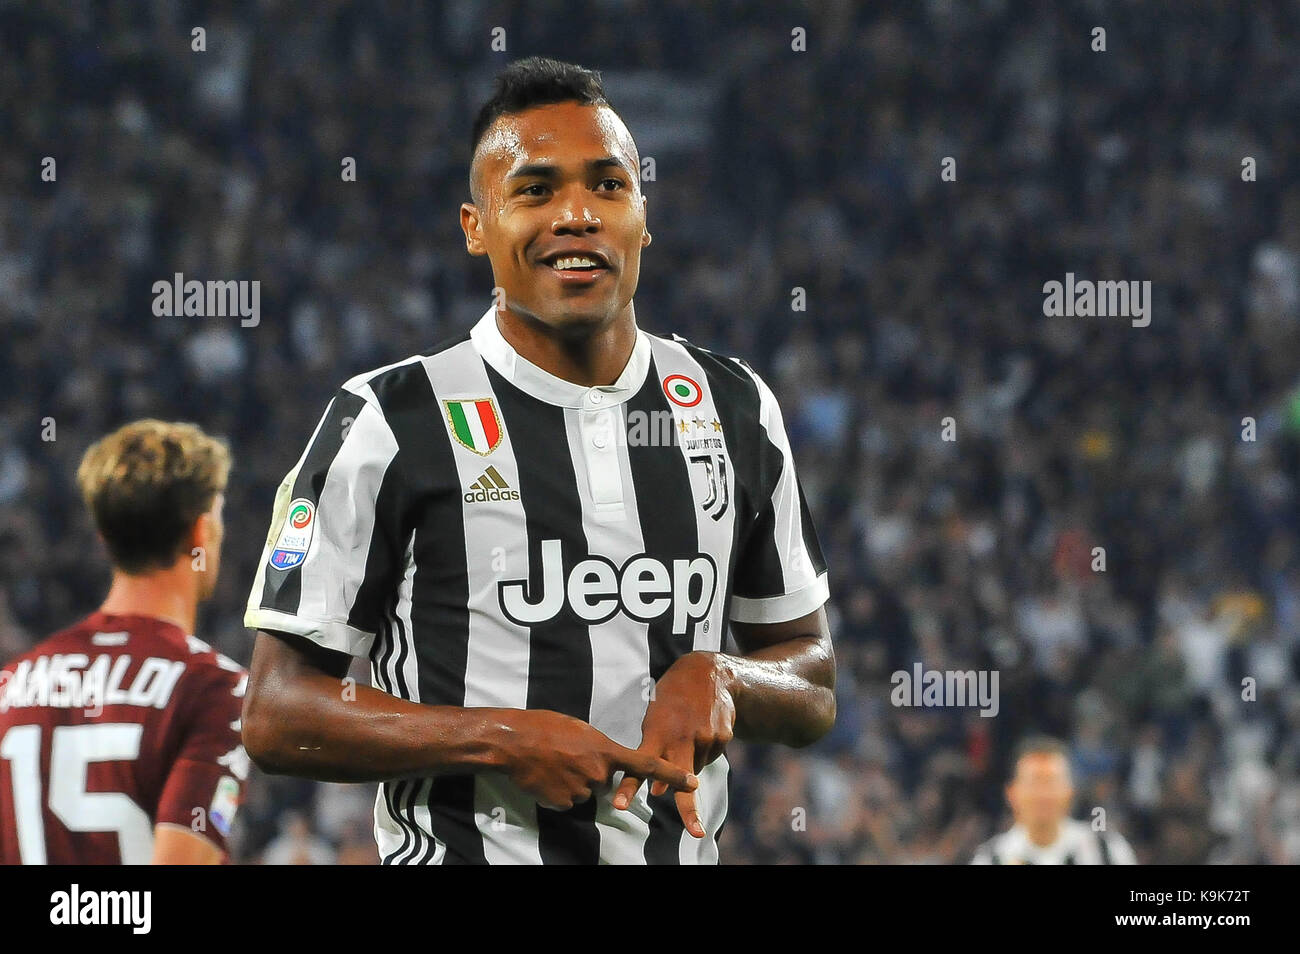 Lobo Silva Alex Sandro (Juventus FC) during the Serie A football match between Juventus FC and  Torino FC at Allianz Stadium on 23 September, 2017 in Turin, Italy. Stock Photo